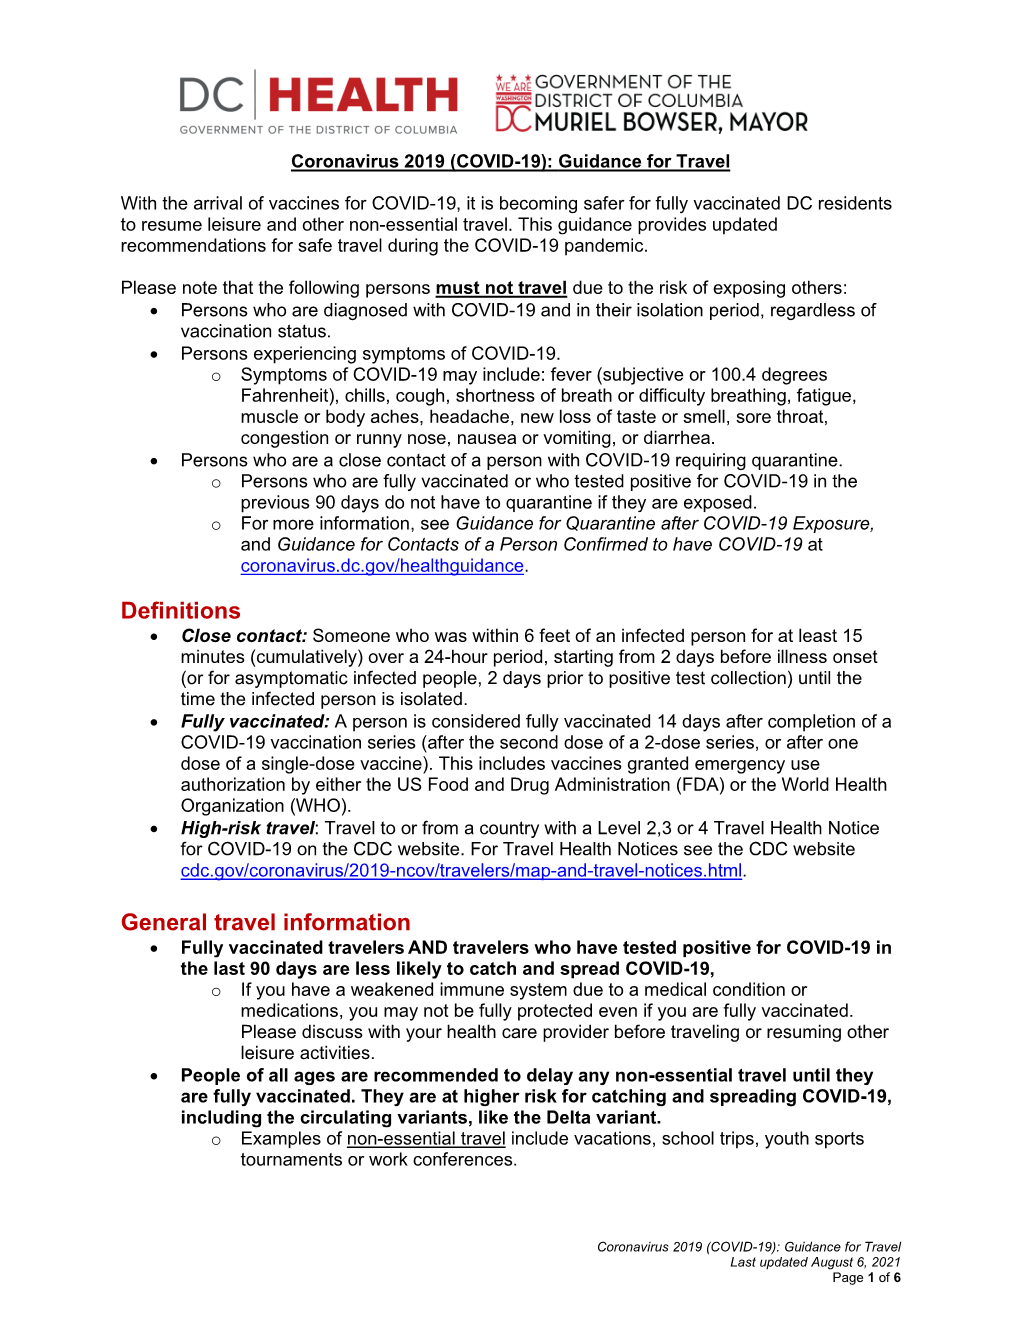 Updated Guidance for Travel During the COVID-19 Pandemic